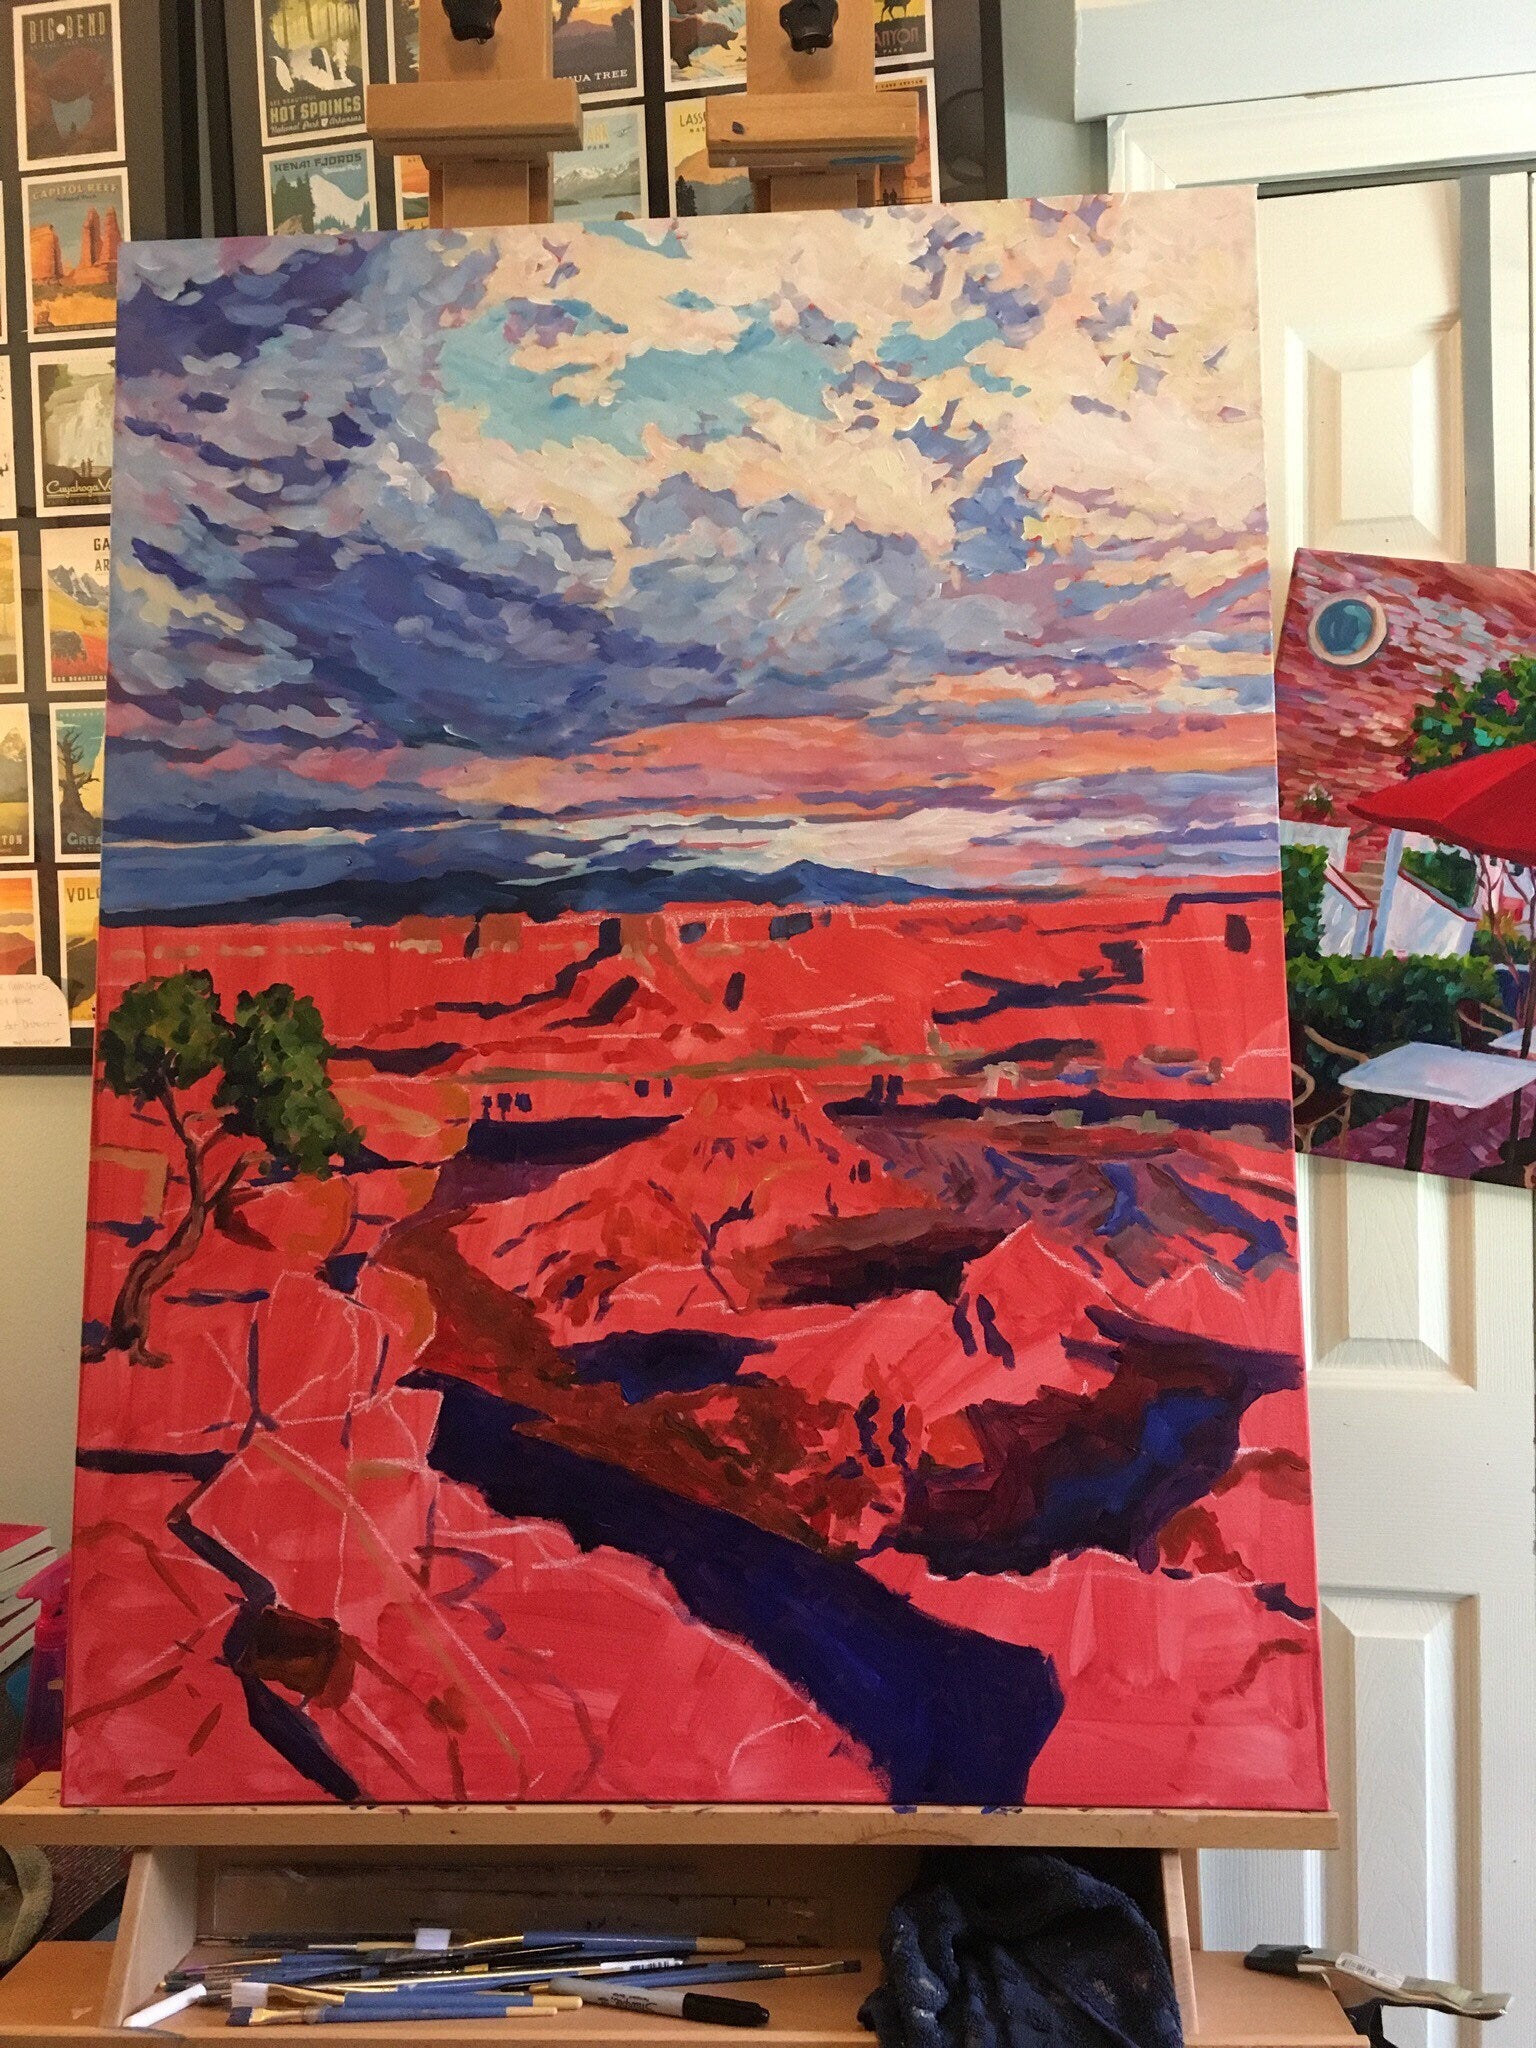 painting in studio in process, sky painted foreground is unpainted- Canyonlands